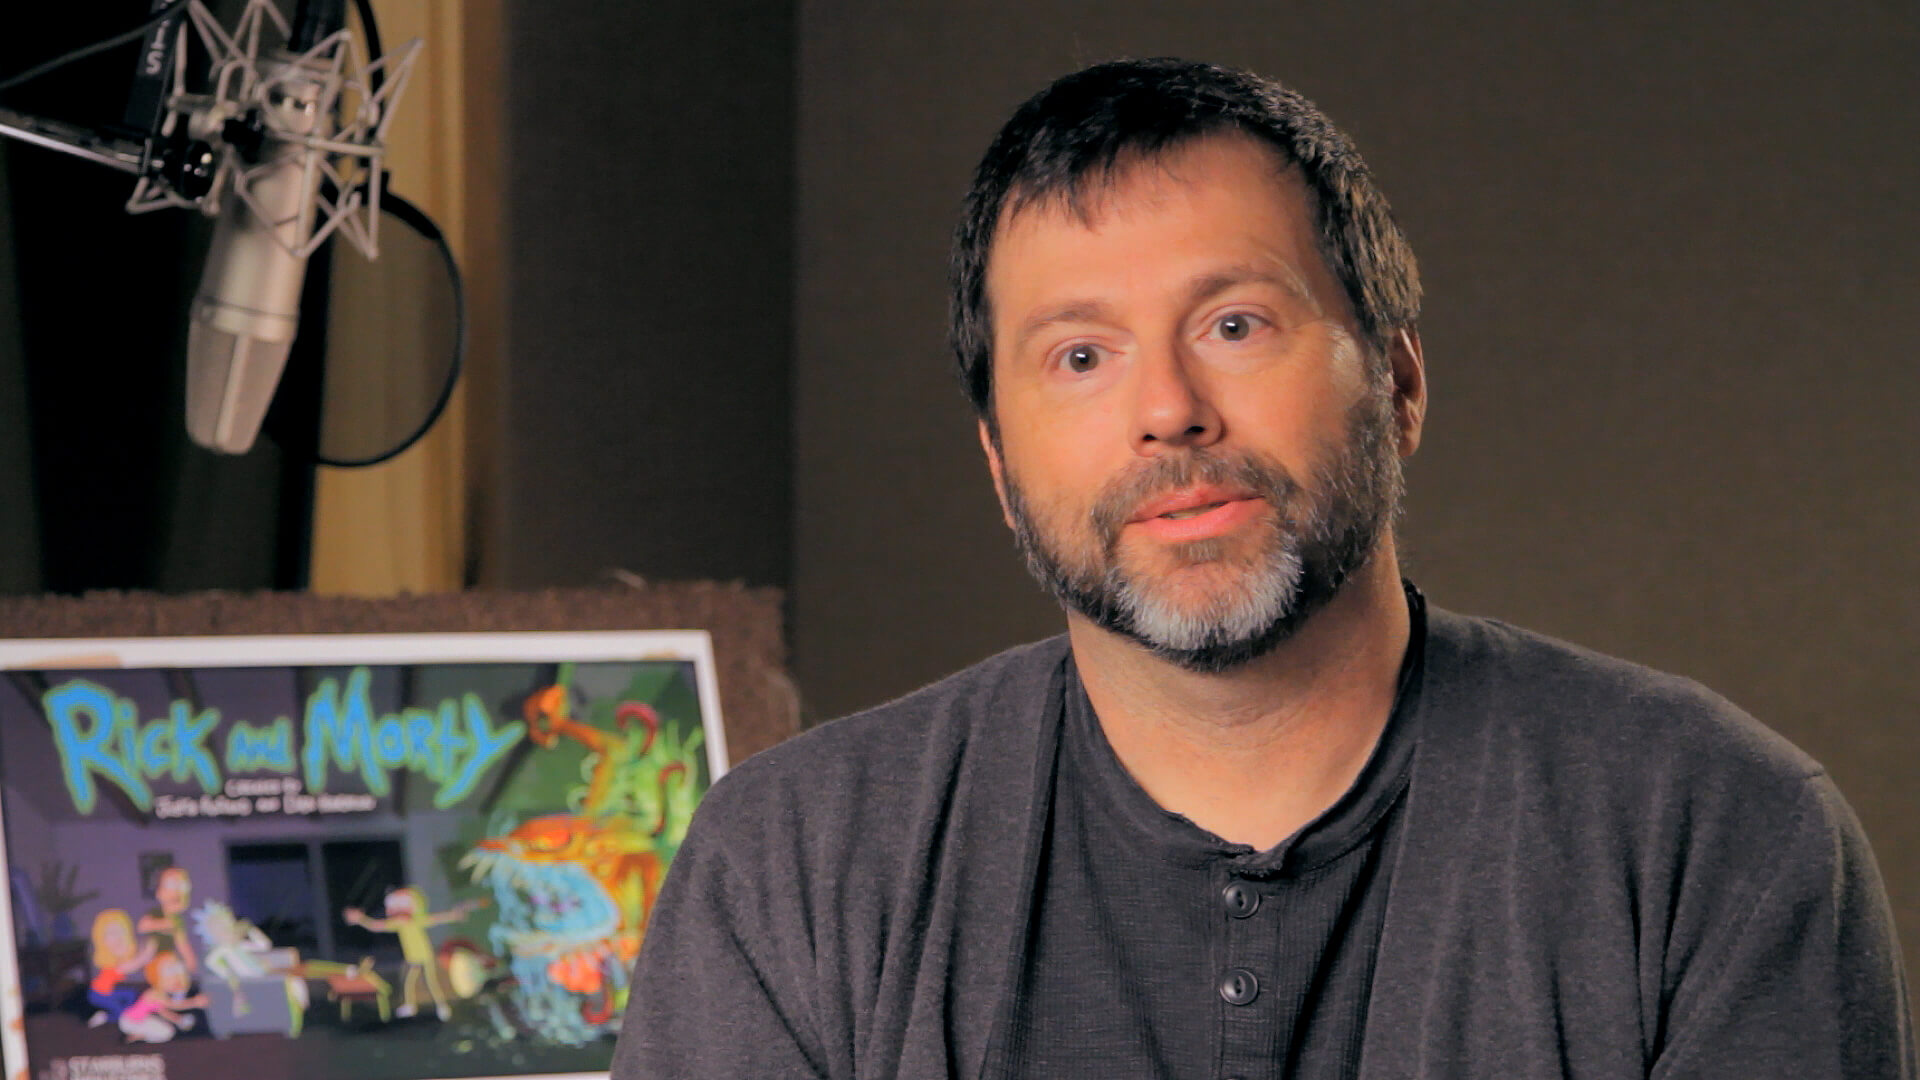 Animation director Pete Michels in a still frame from the Rick and Morty behind-the-scenes produced by Todd Bishop